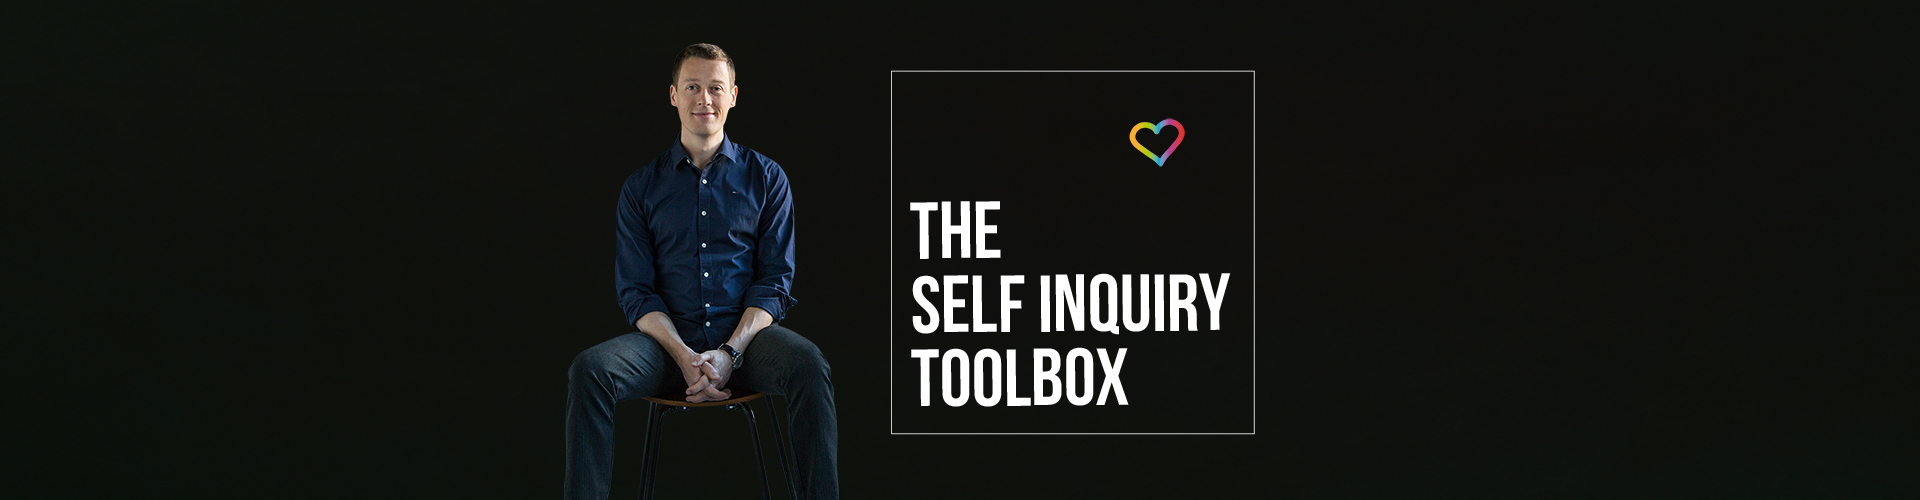 The Self Inquiry Toolbox